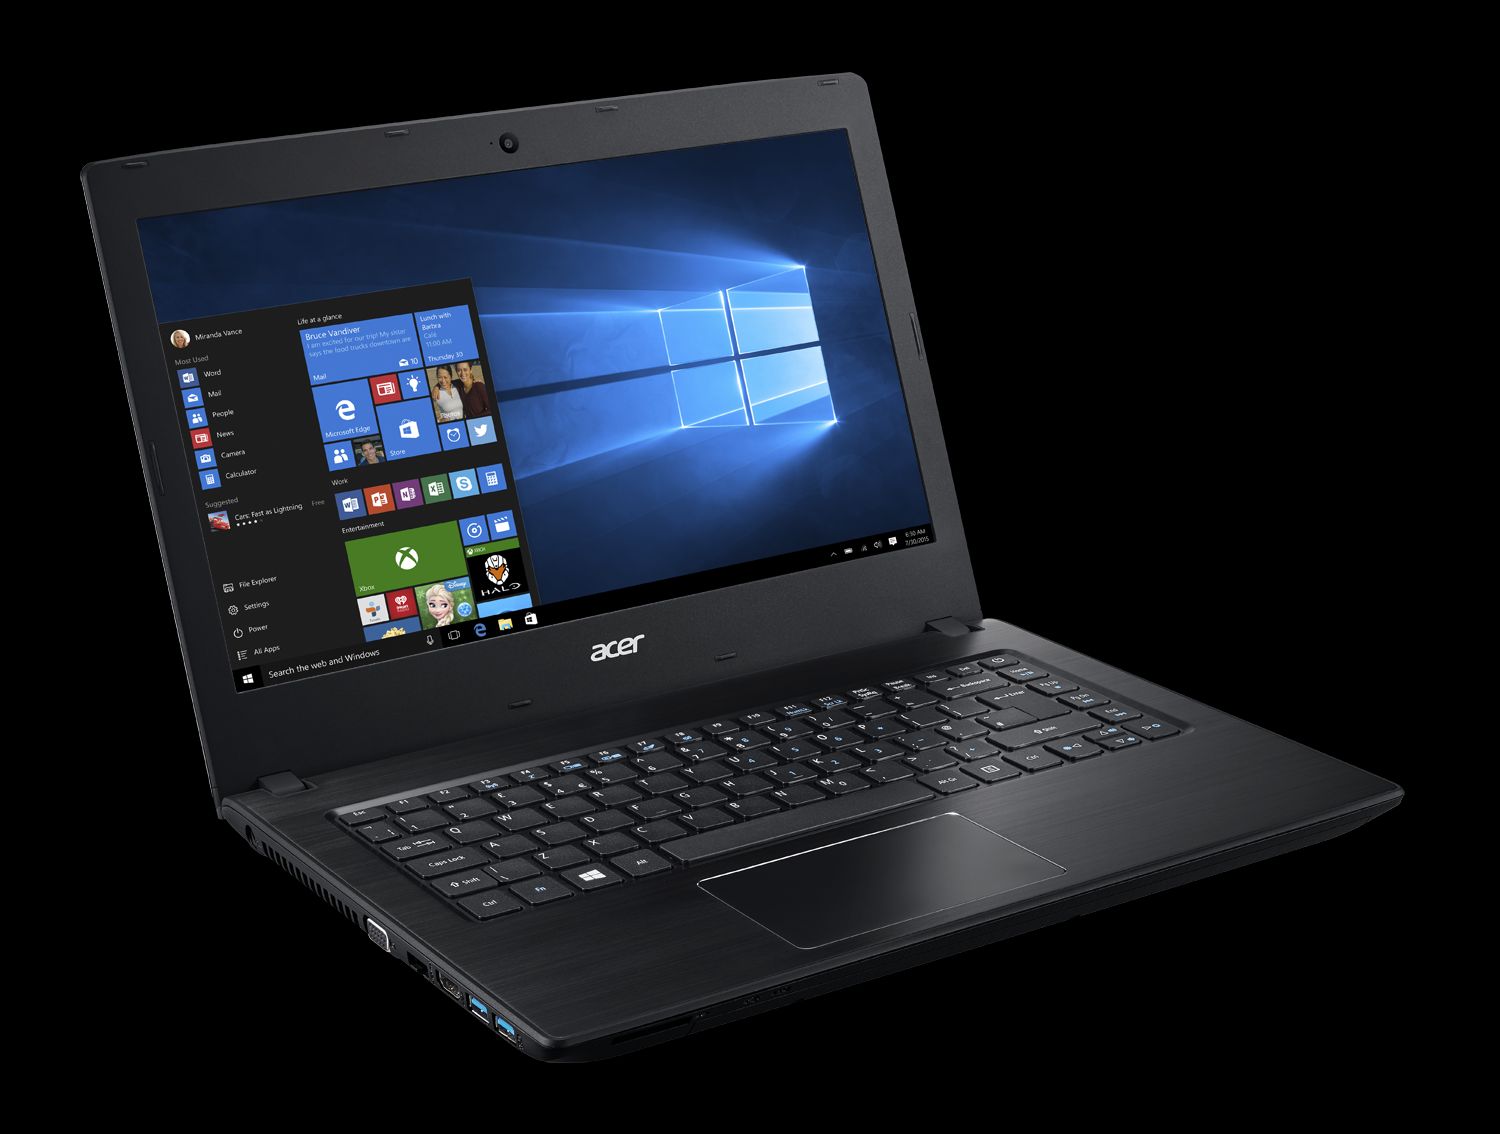 Acer Launches New Cheap Windows 10 Laptops